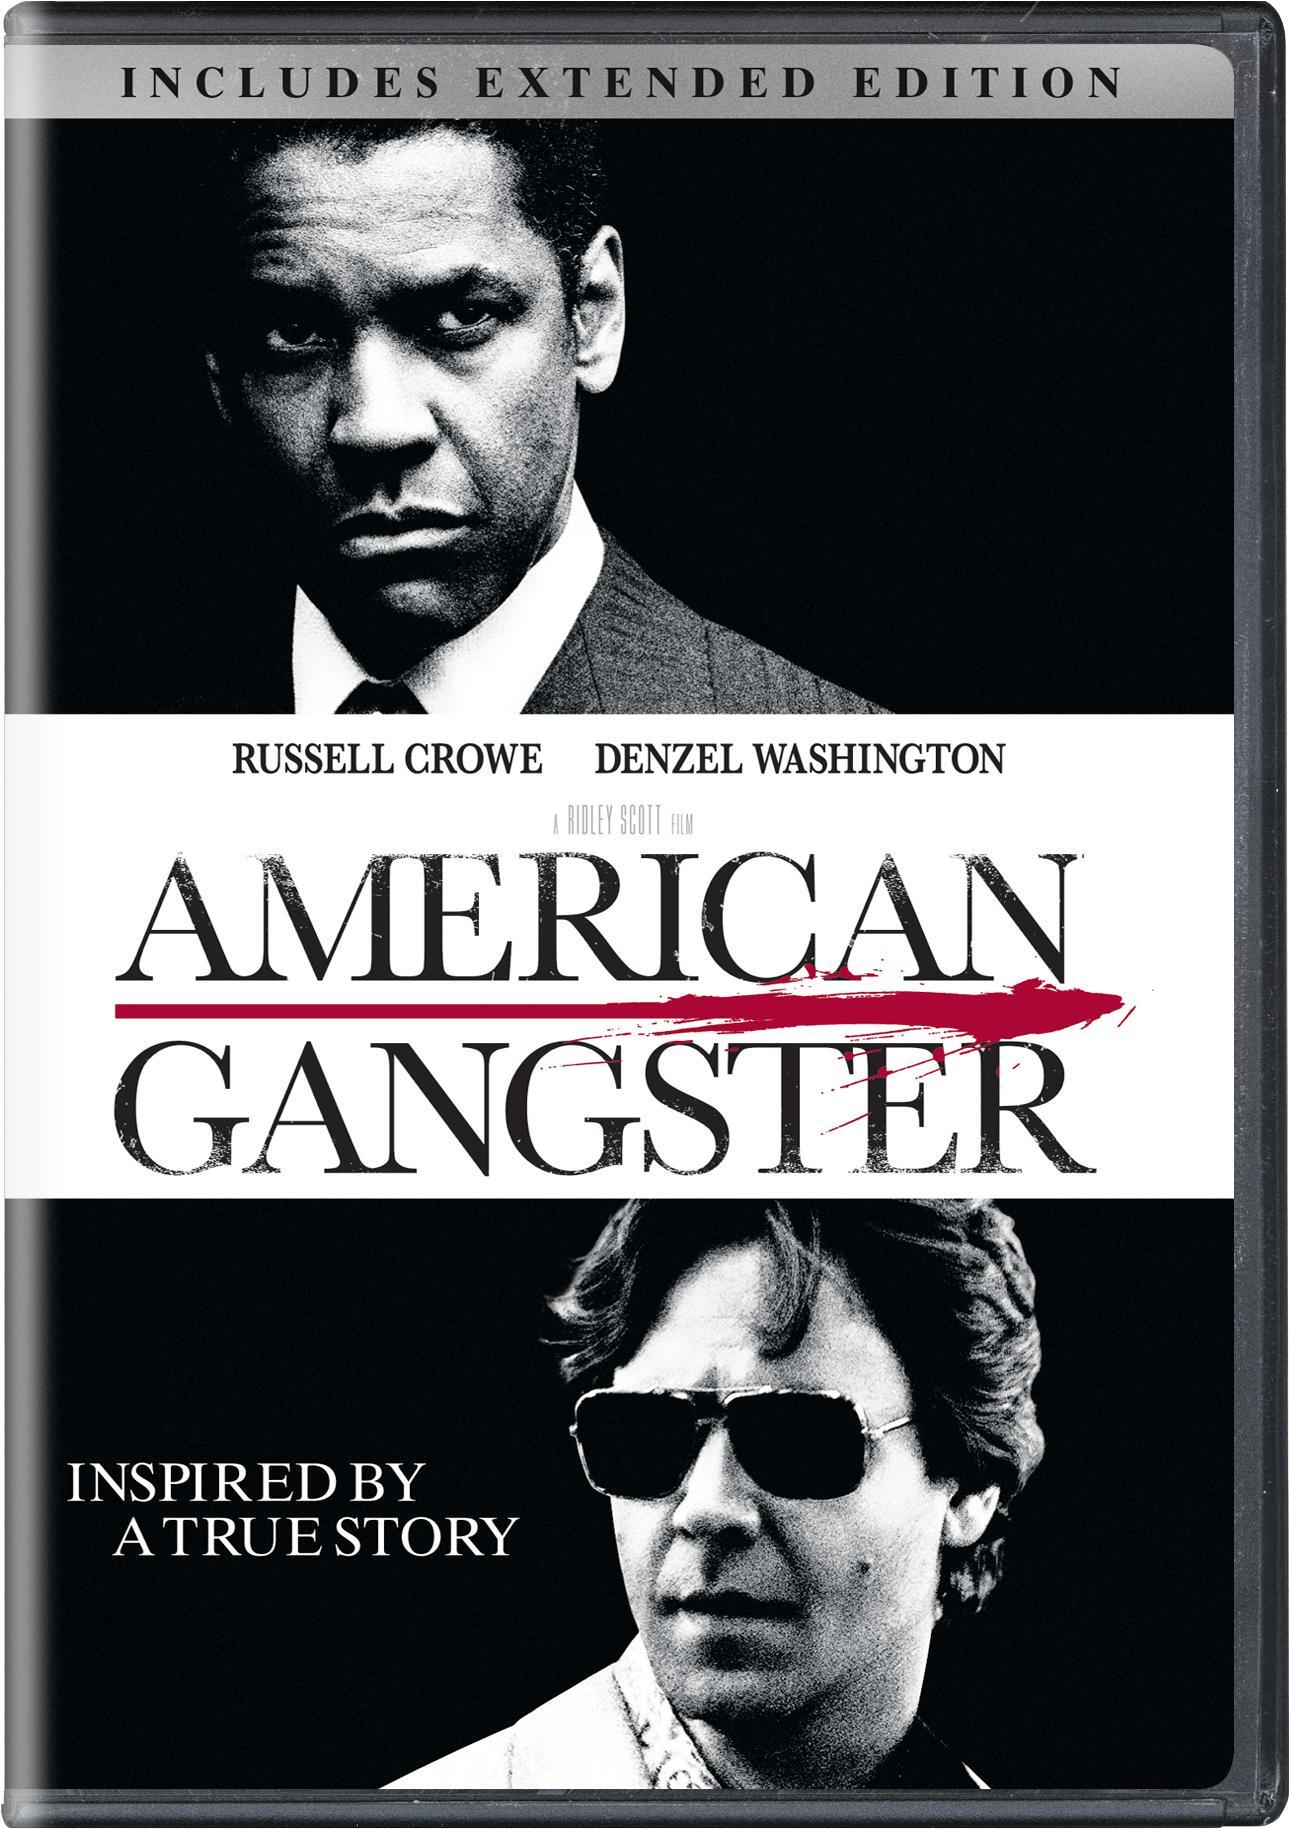 American Gangster (DVD Single Disc) - DVD [ 2007 ]  - Thriller Movies On DVD - Movies On GRUV